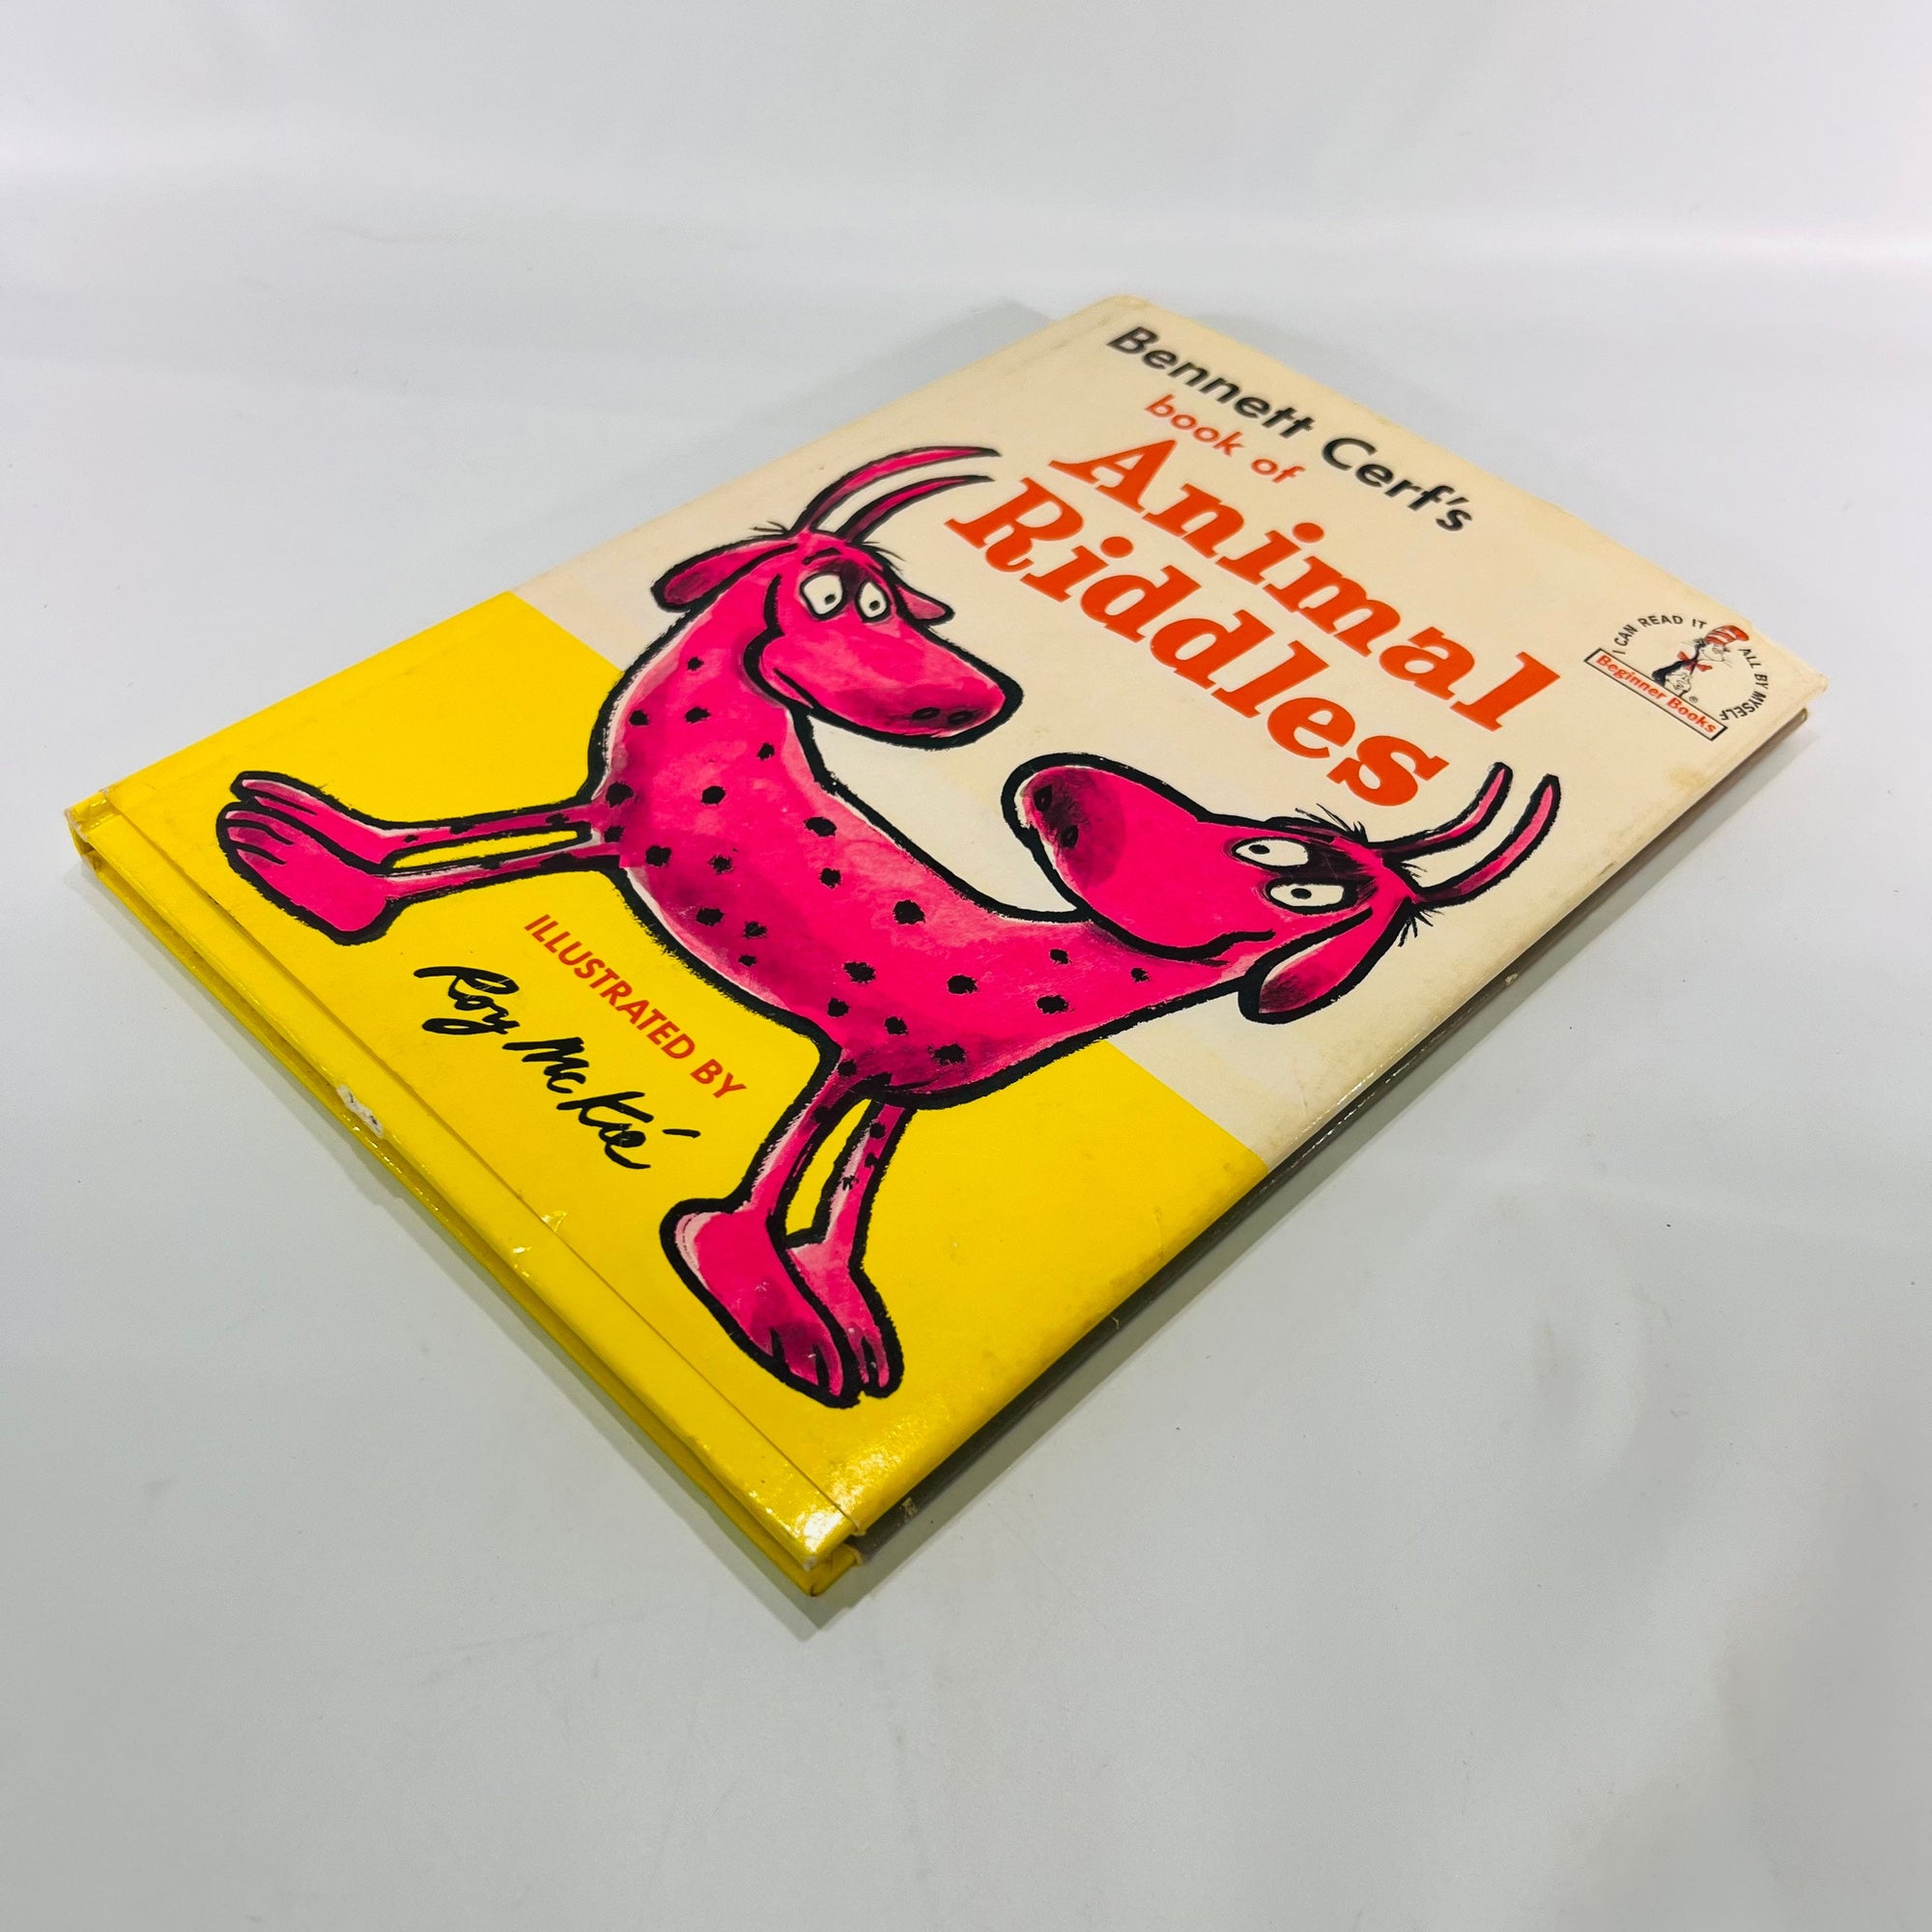 Bennett Cerf's book of Animal Riddles illustrated by Roy McKie 1964 I Can Read It Beginner Books Vintage Colorful Joke Book